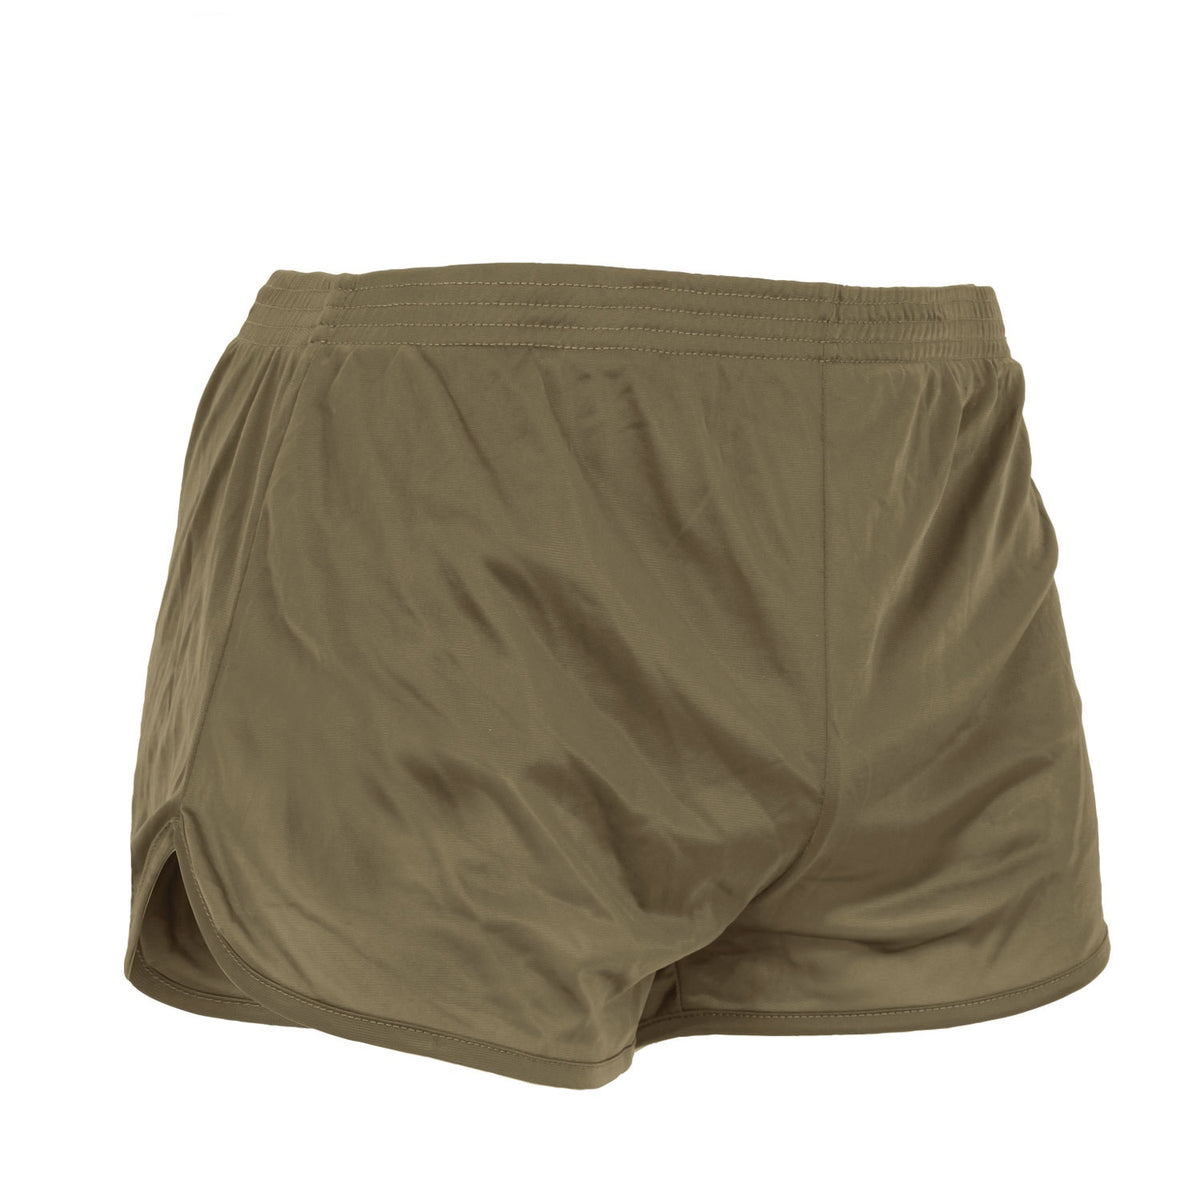 Rothco Ranger P/T (Physical Training) Shorts Coyote Brown